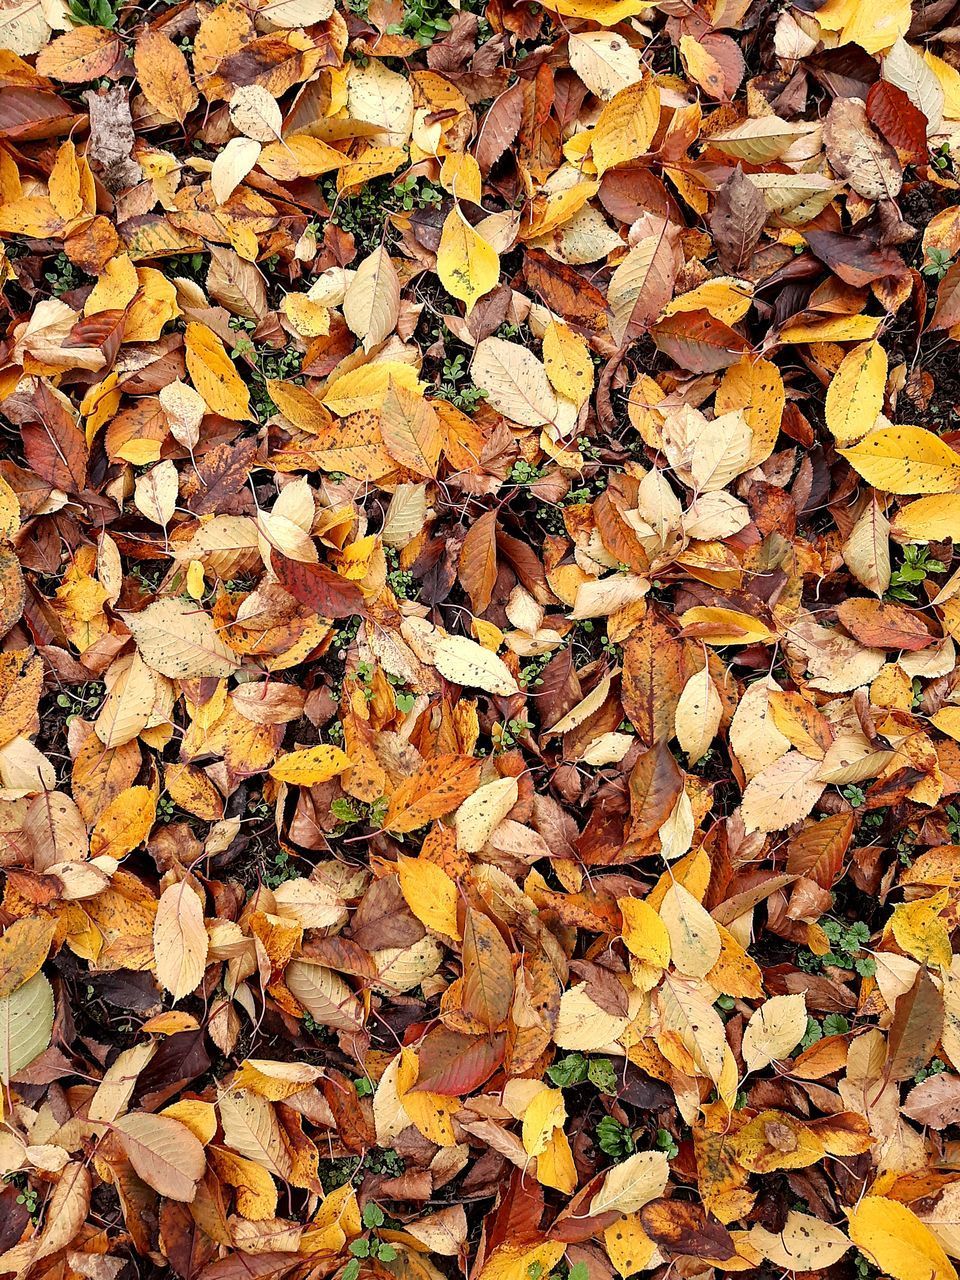 CLOSE-UP OF AUTUMN LEAVES ON FIELD